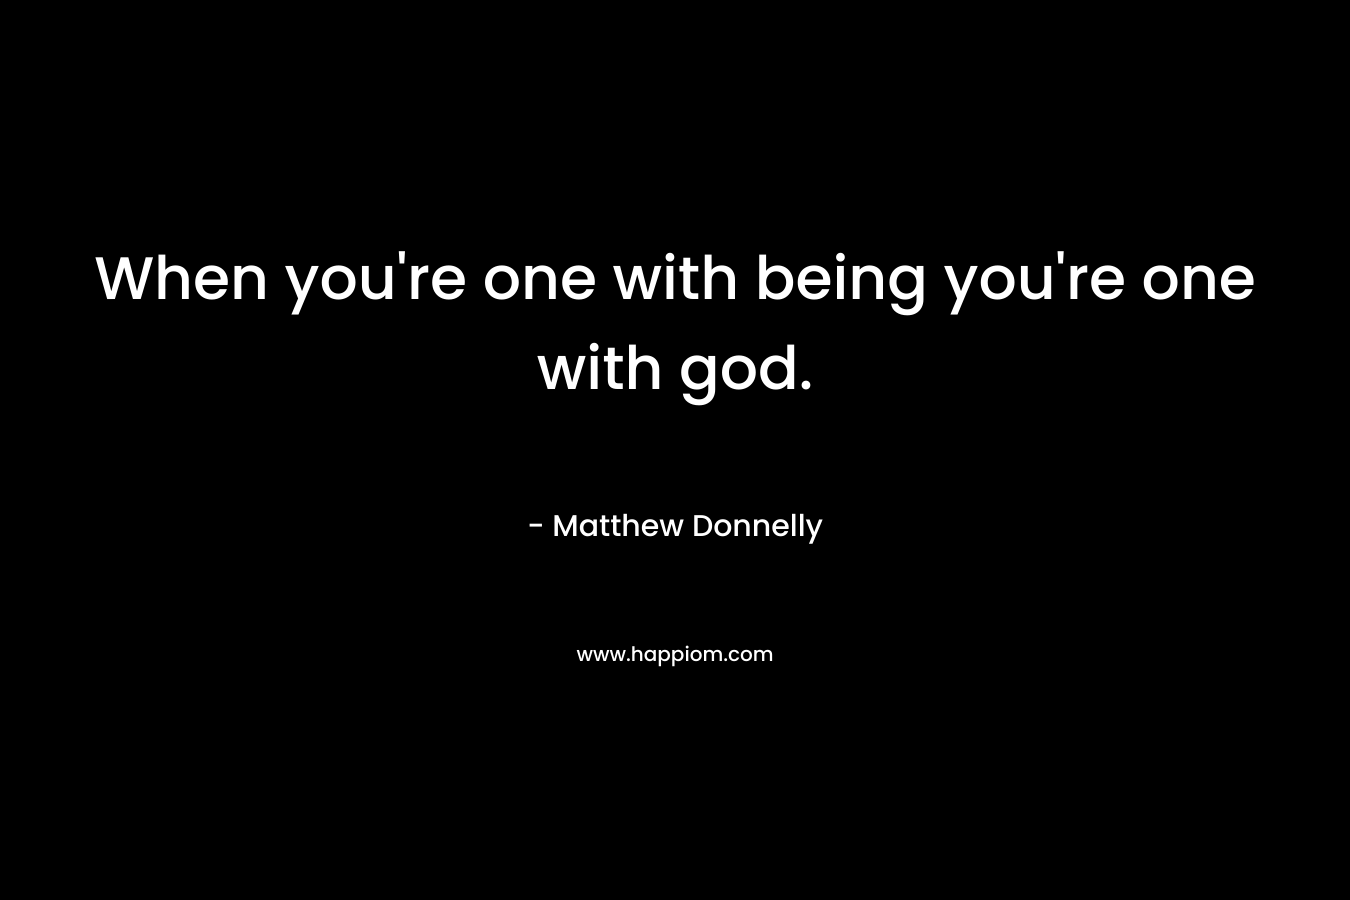 When you're one with being you're one with god.